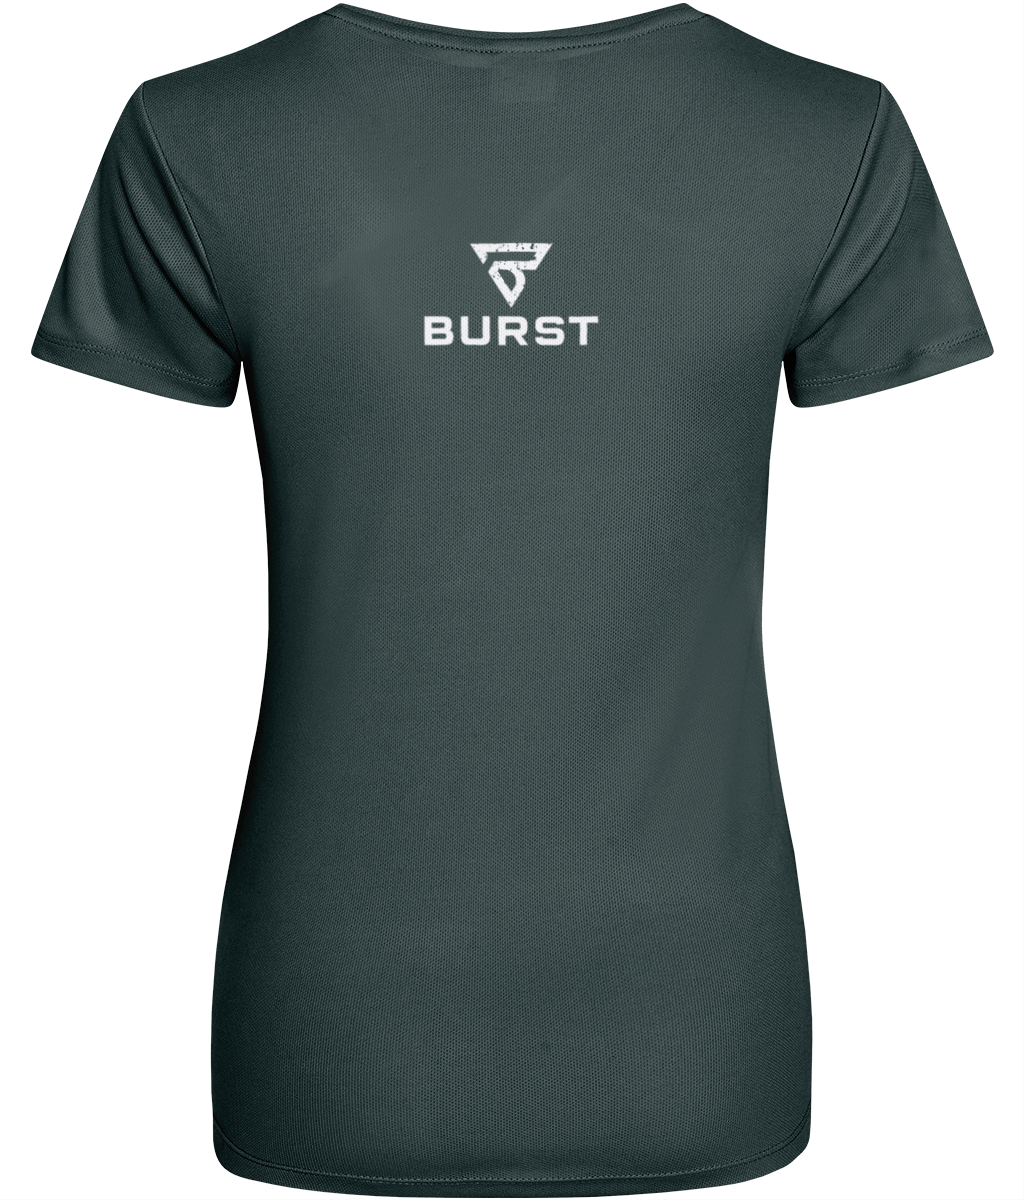 BURST Ladies OCEAN Active Recycled Dry-Fit Light Breathable Workout T Shirt (Charcoal)